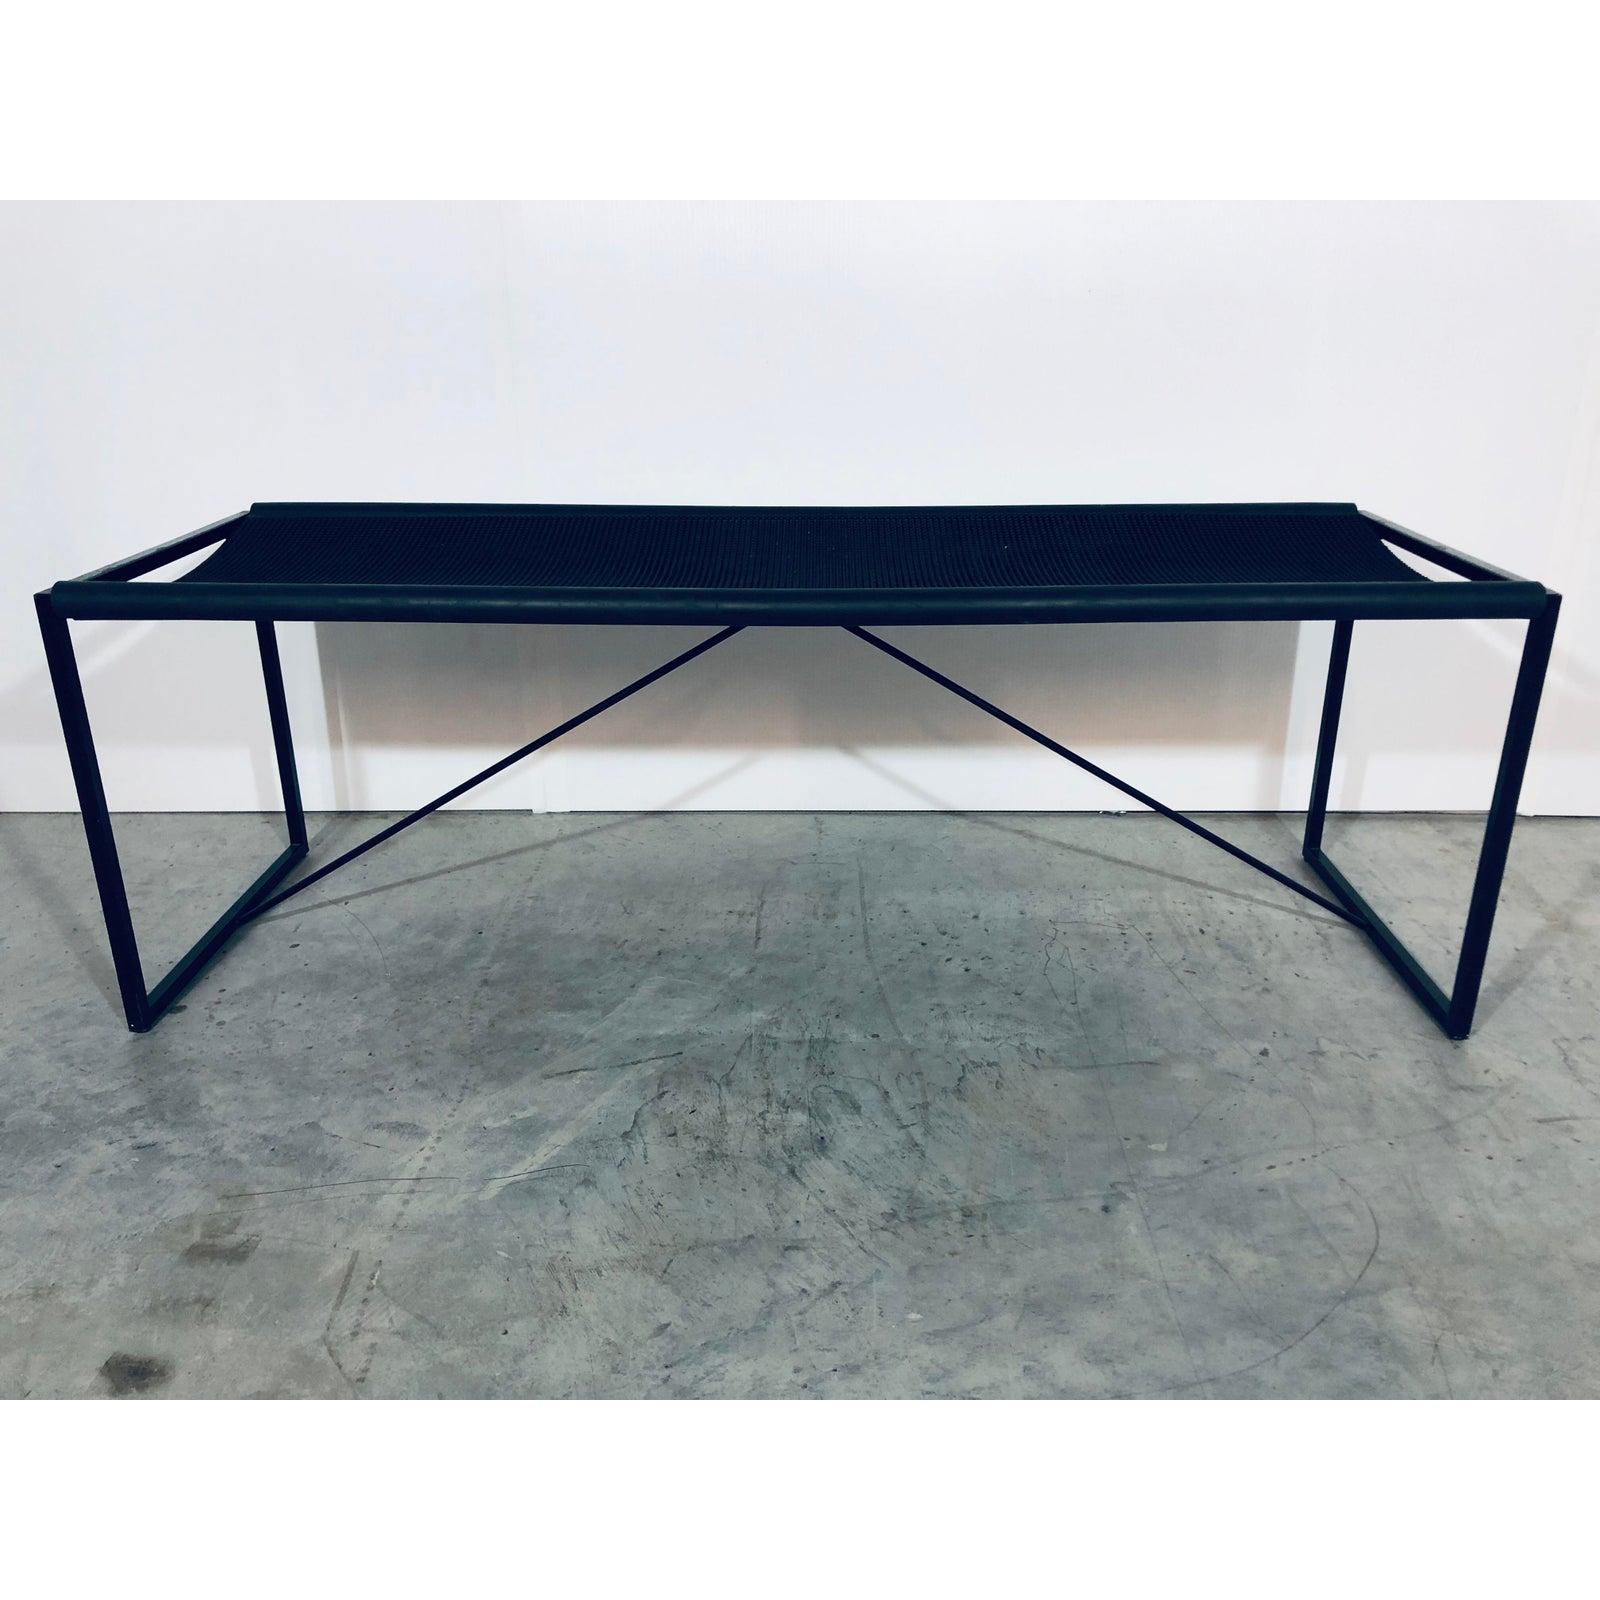 Maurizio Peregalli Modernist Bench for Zues, Italy, 1980s For Sale 9